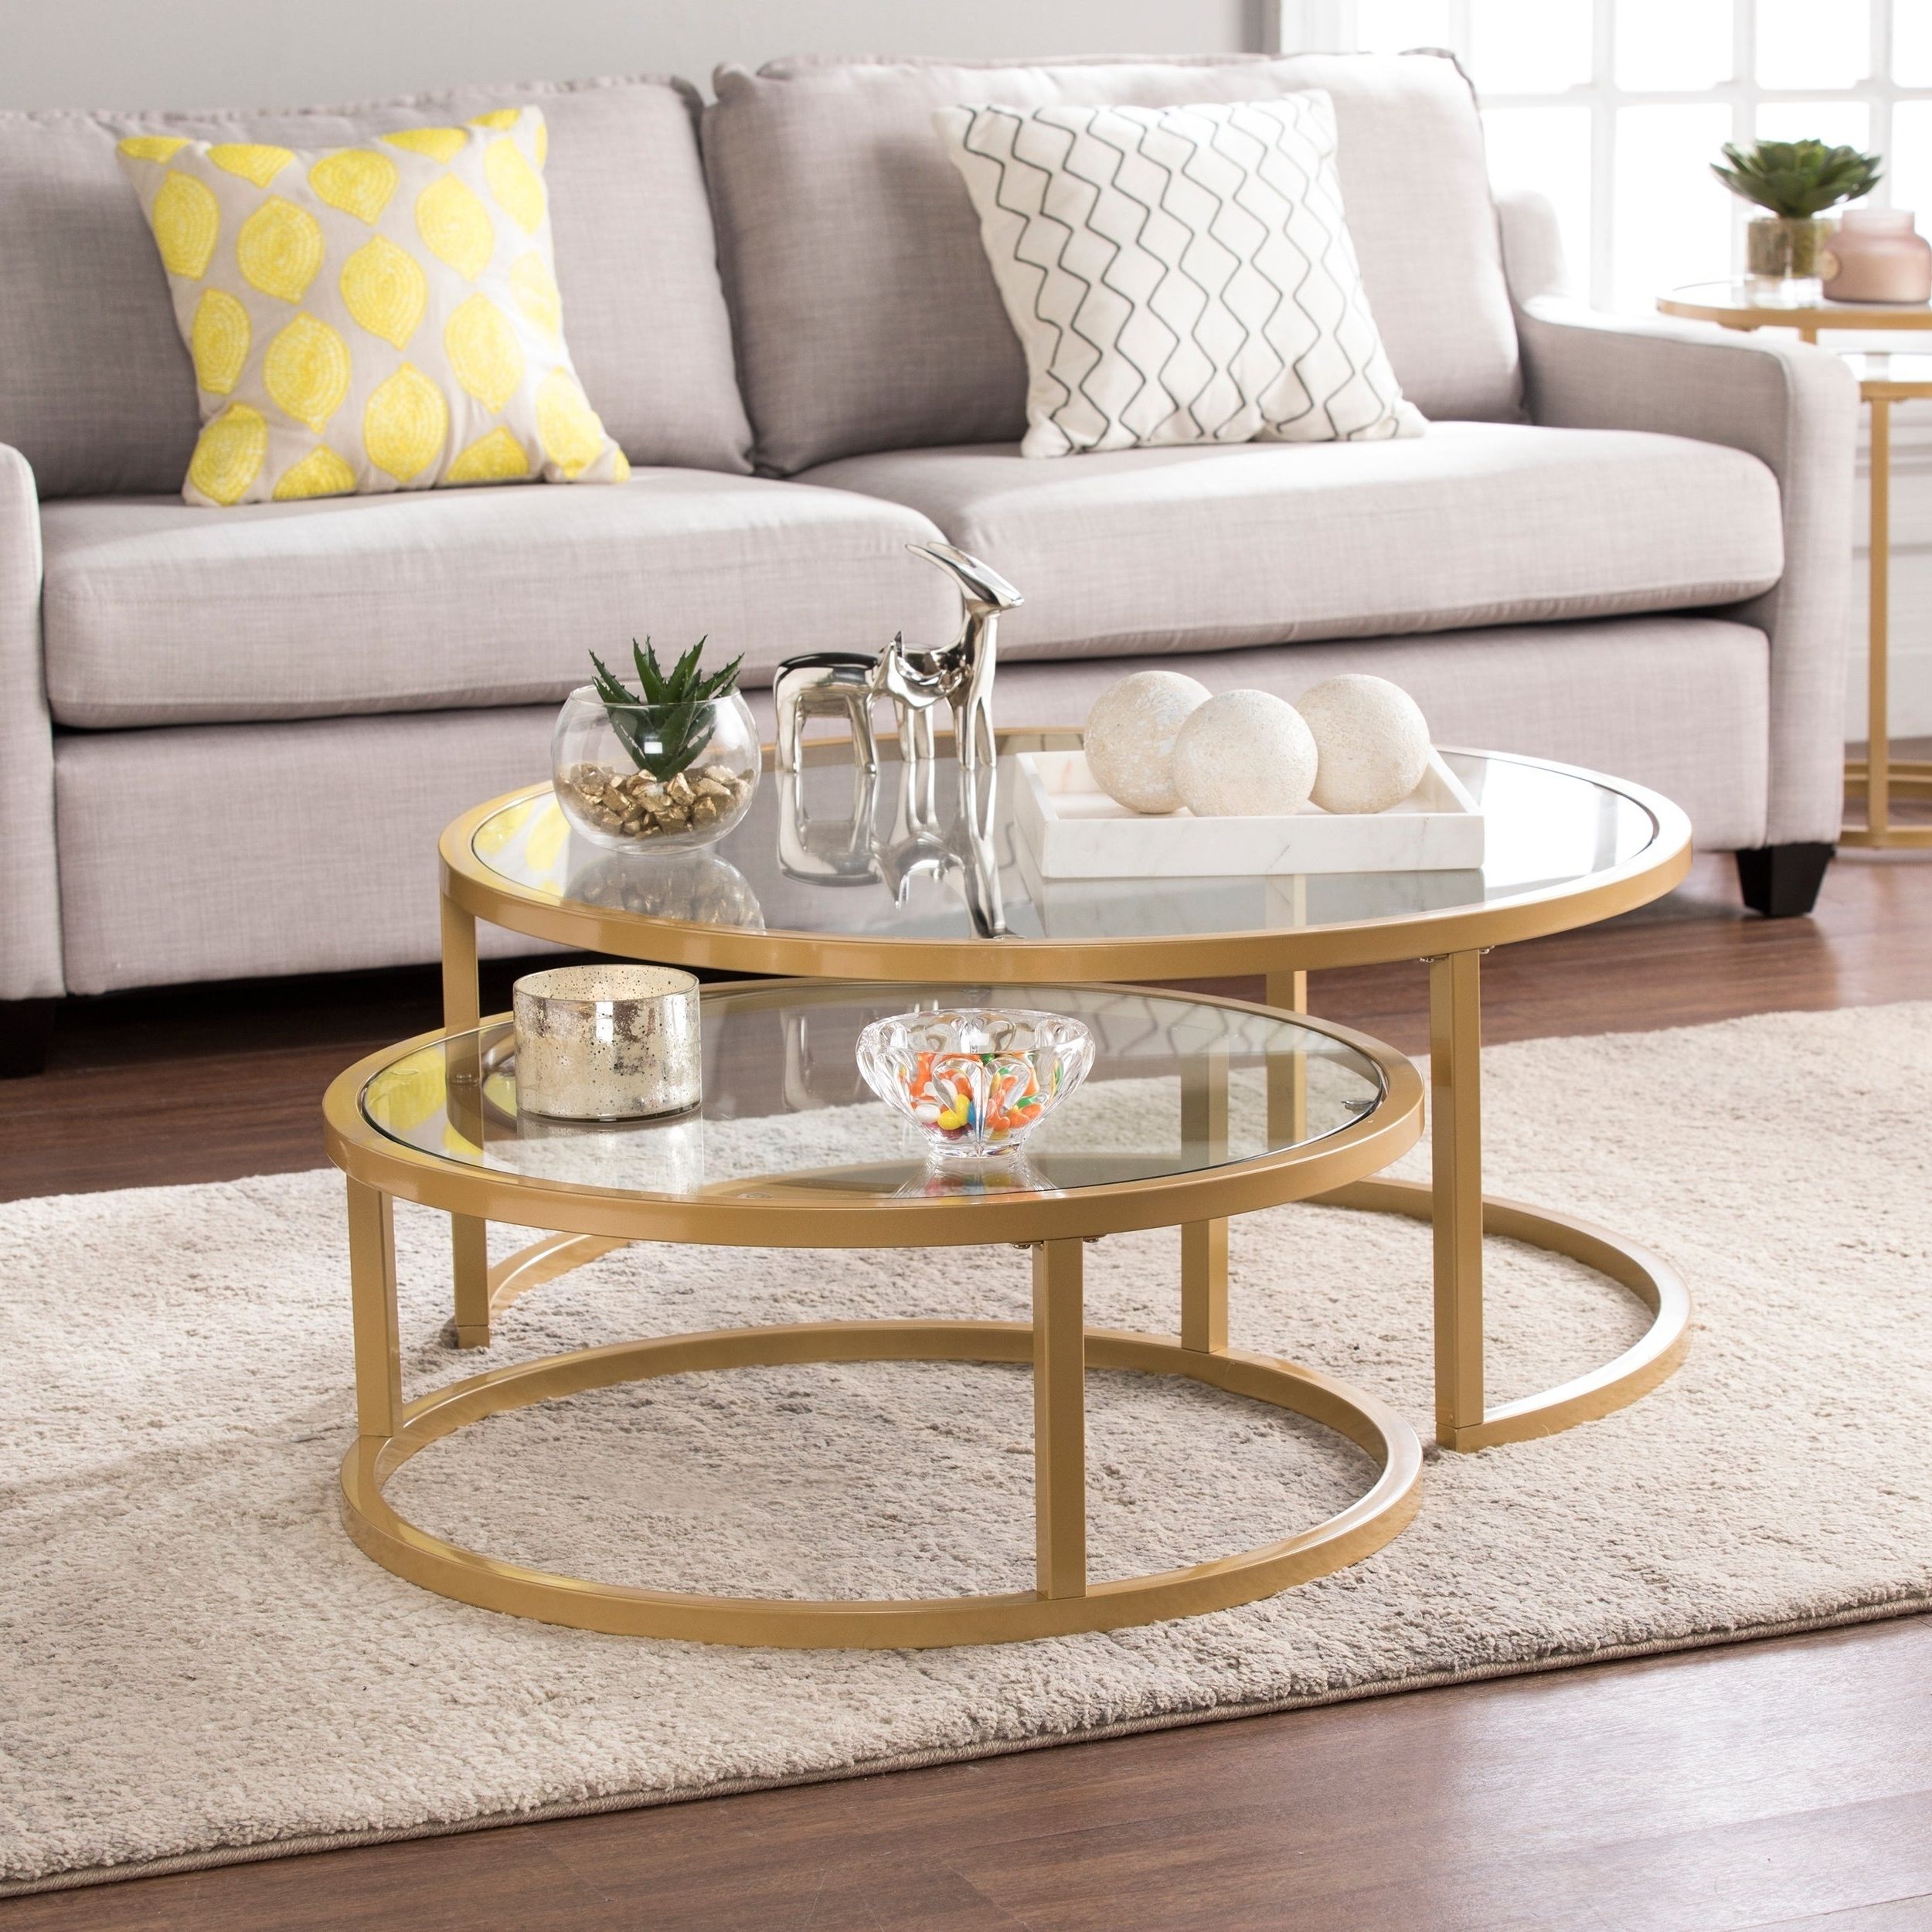 Round Glass Gold Steel Frame Nesting Cocktail Tables 2 Piece Inside Famous Silver Orchid Price Glass Coffee Tables (View 17 of 20)